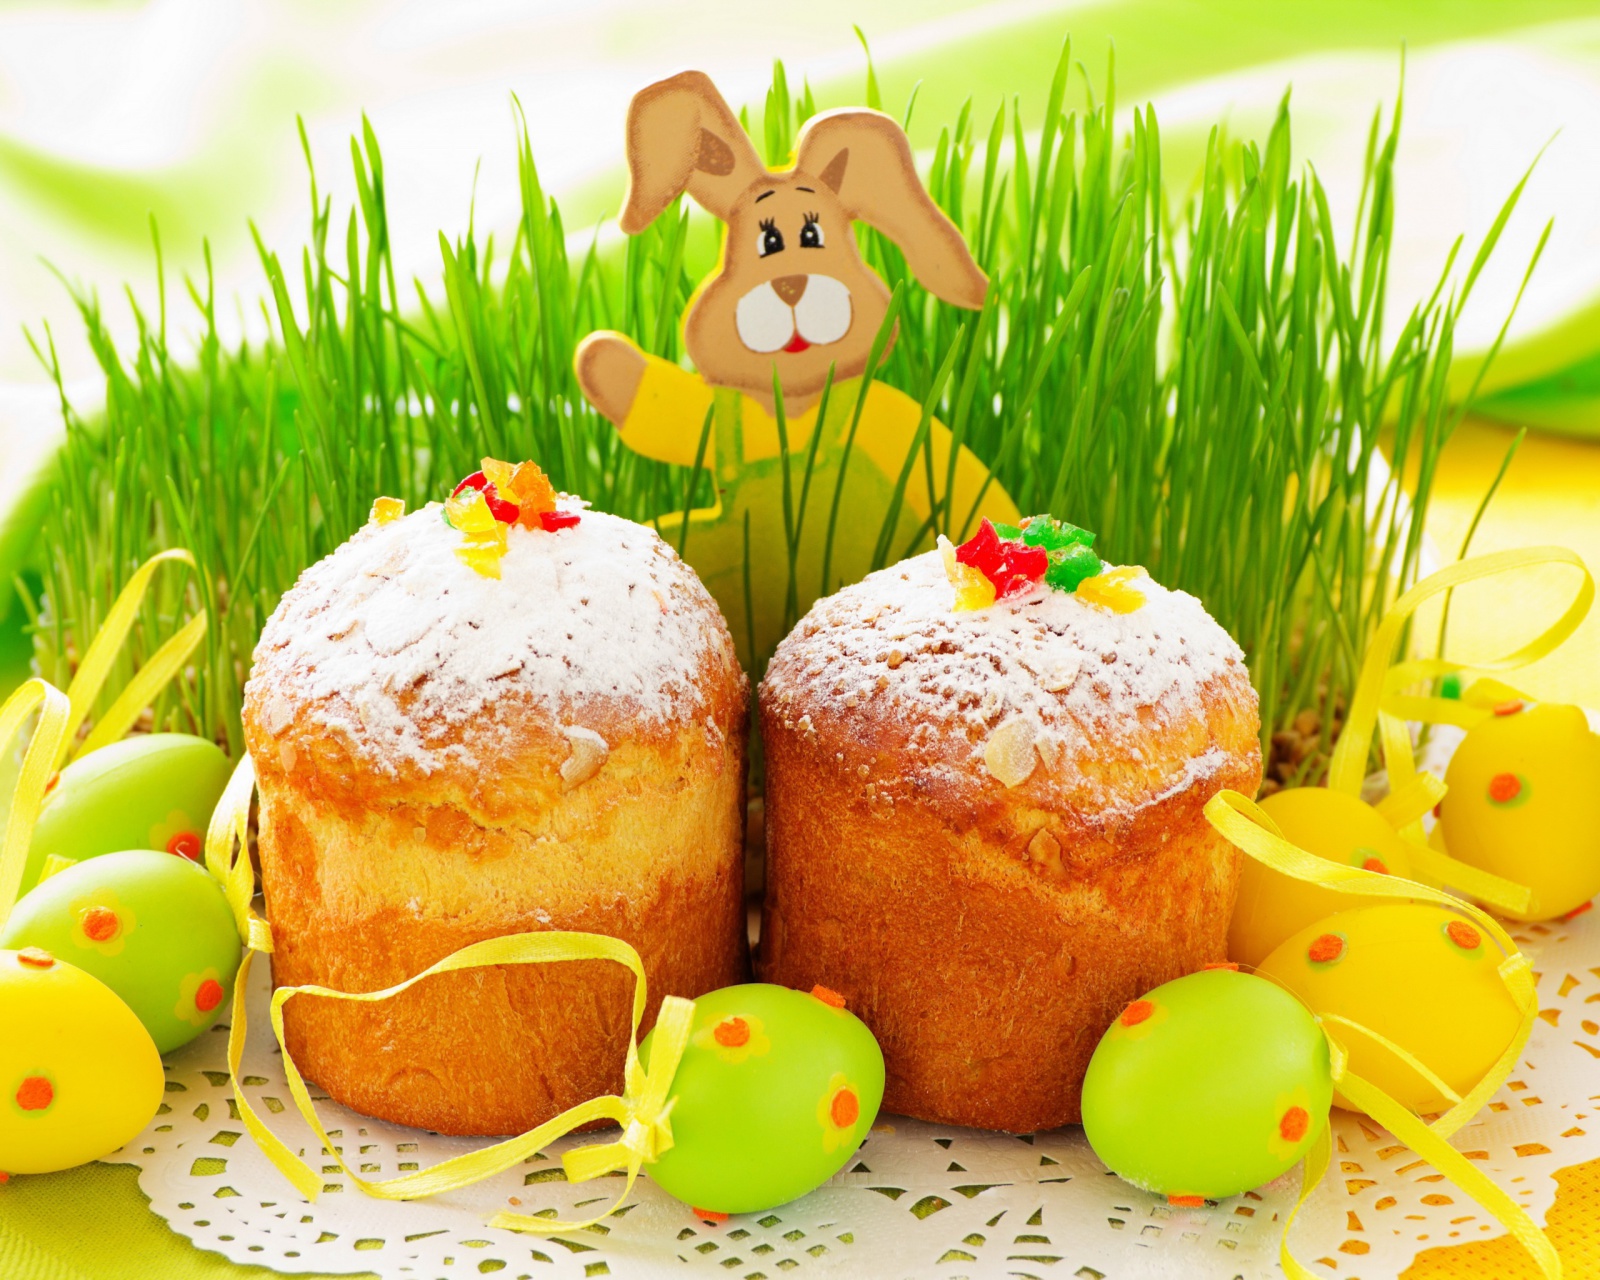 Das Easter Wish and Eggs Wallpaper 1600x1280